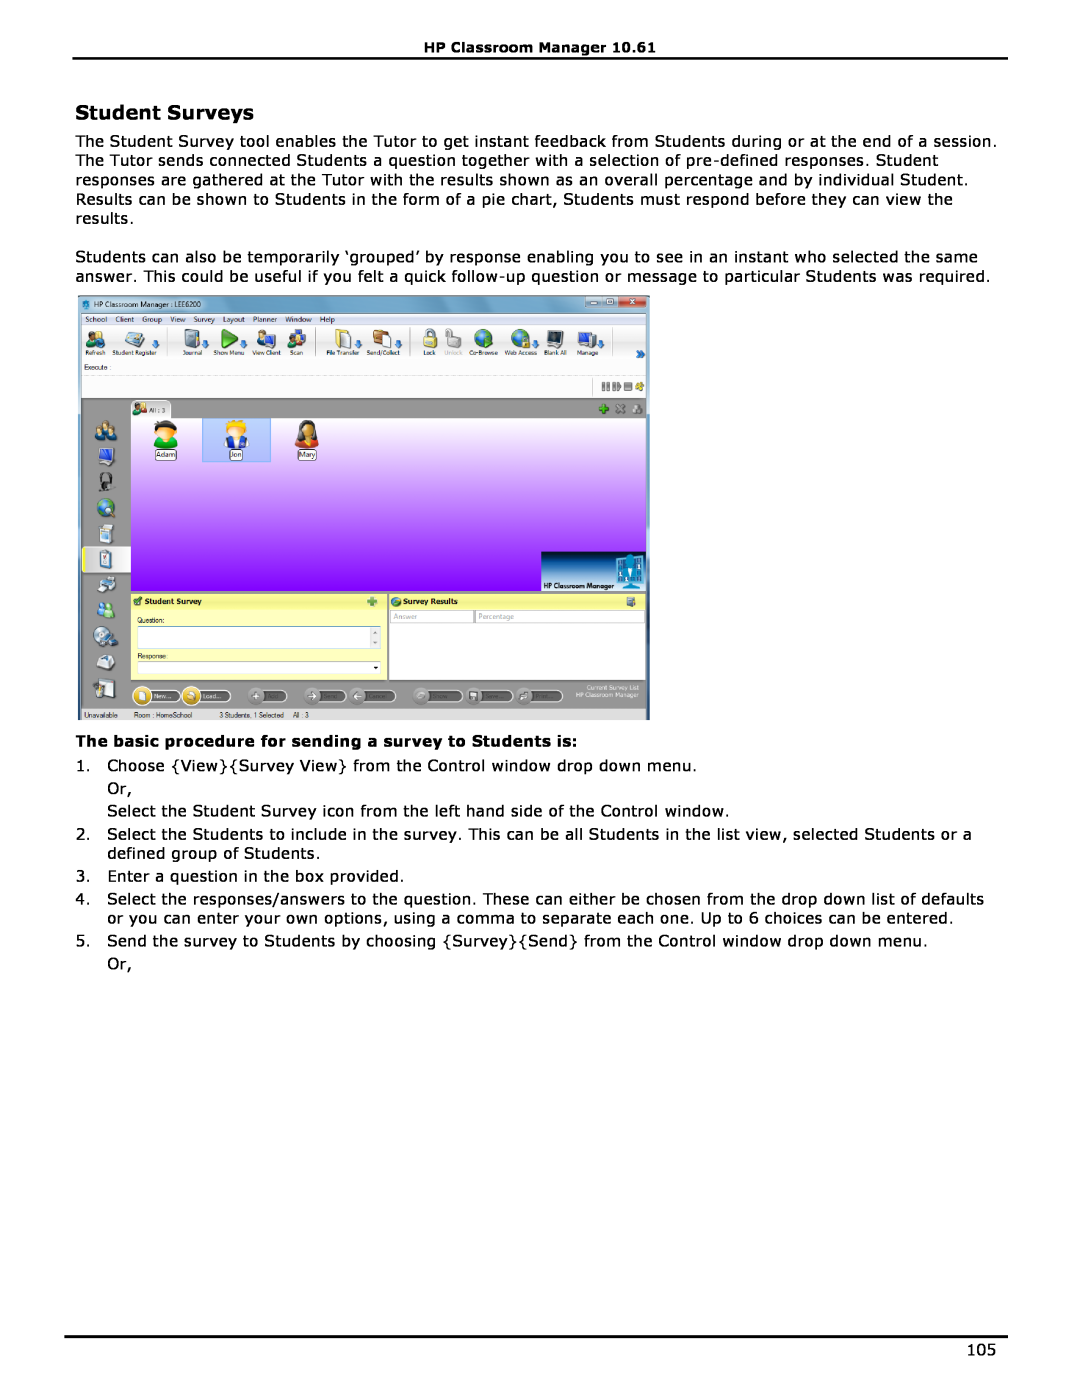 HP Classroom Manager manual Student Surveys, The basic procedure for sending a survey to Students is 